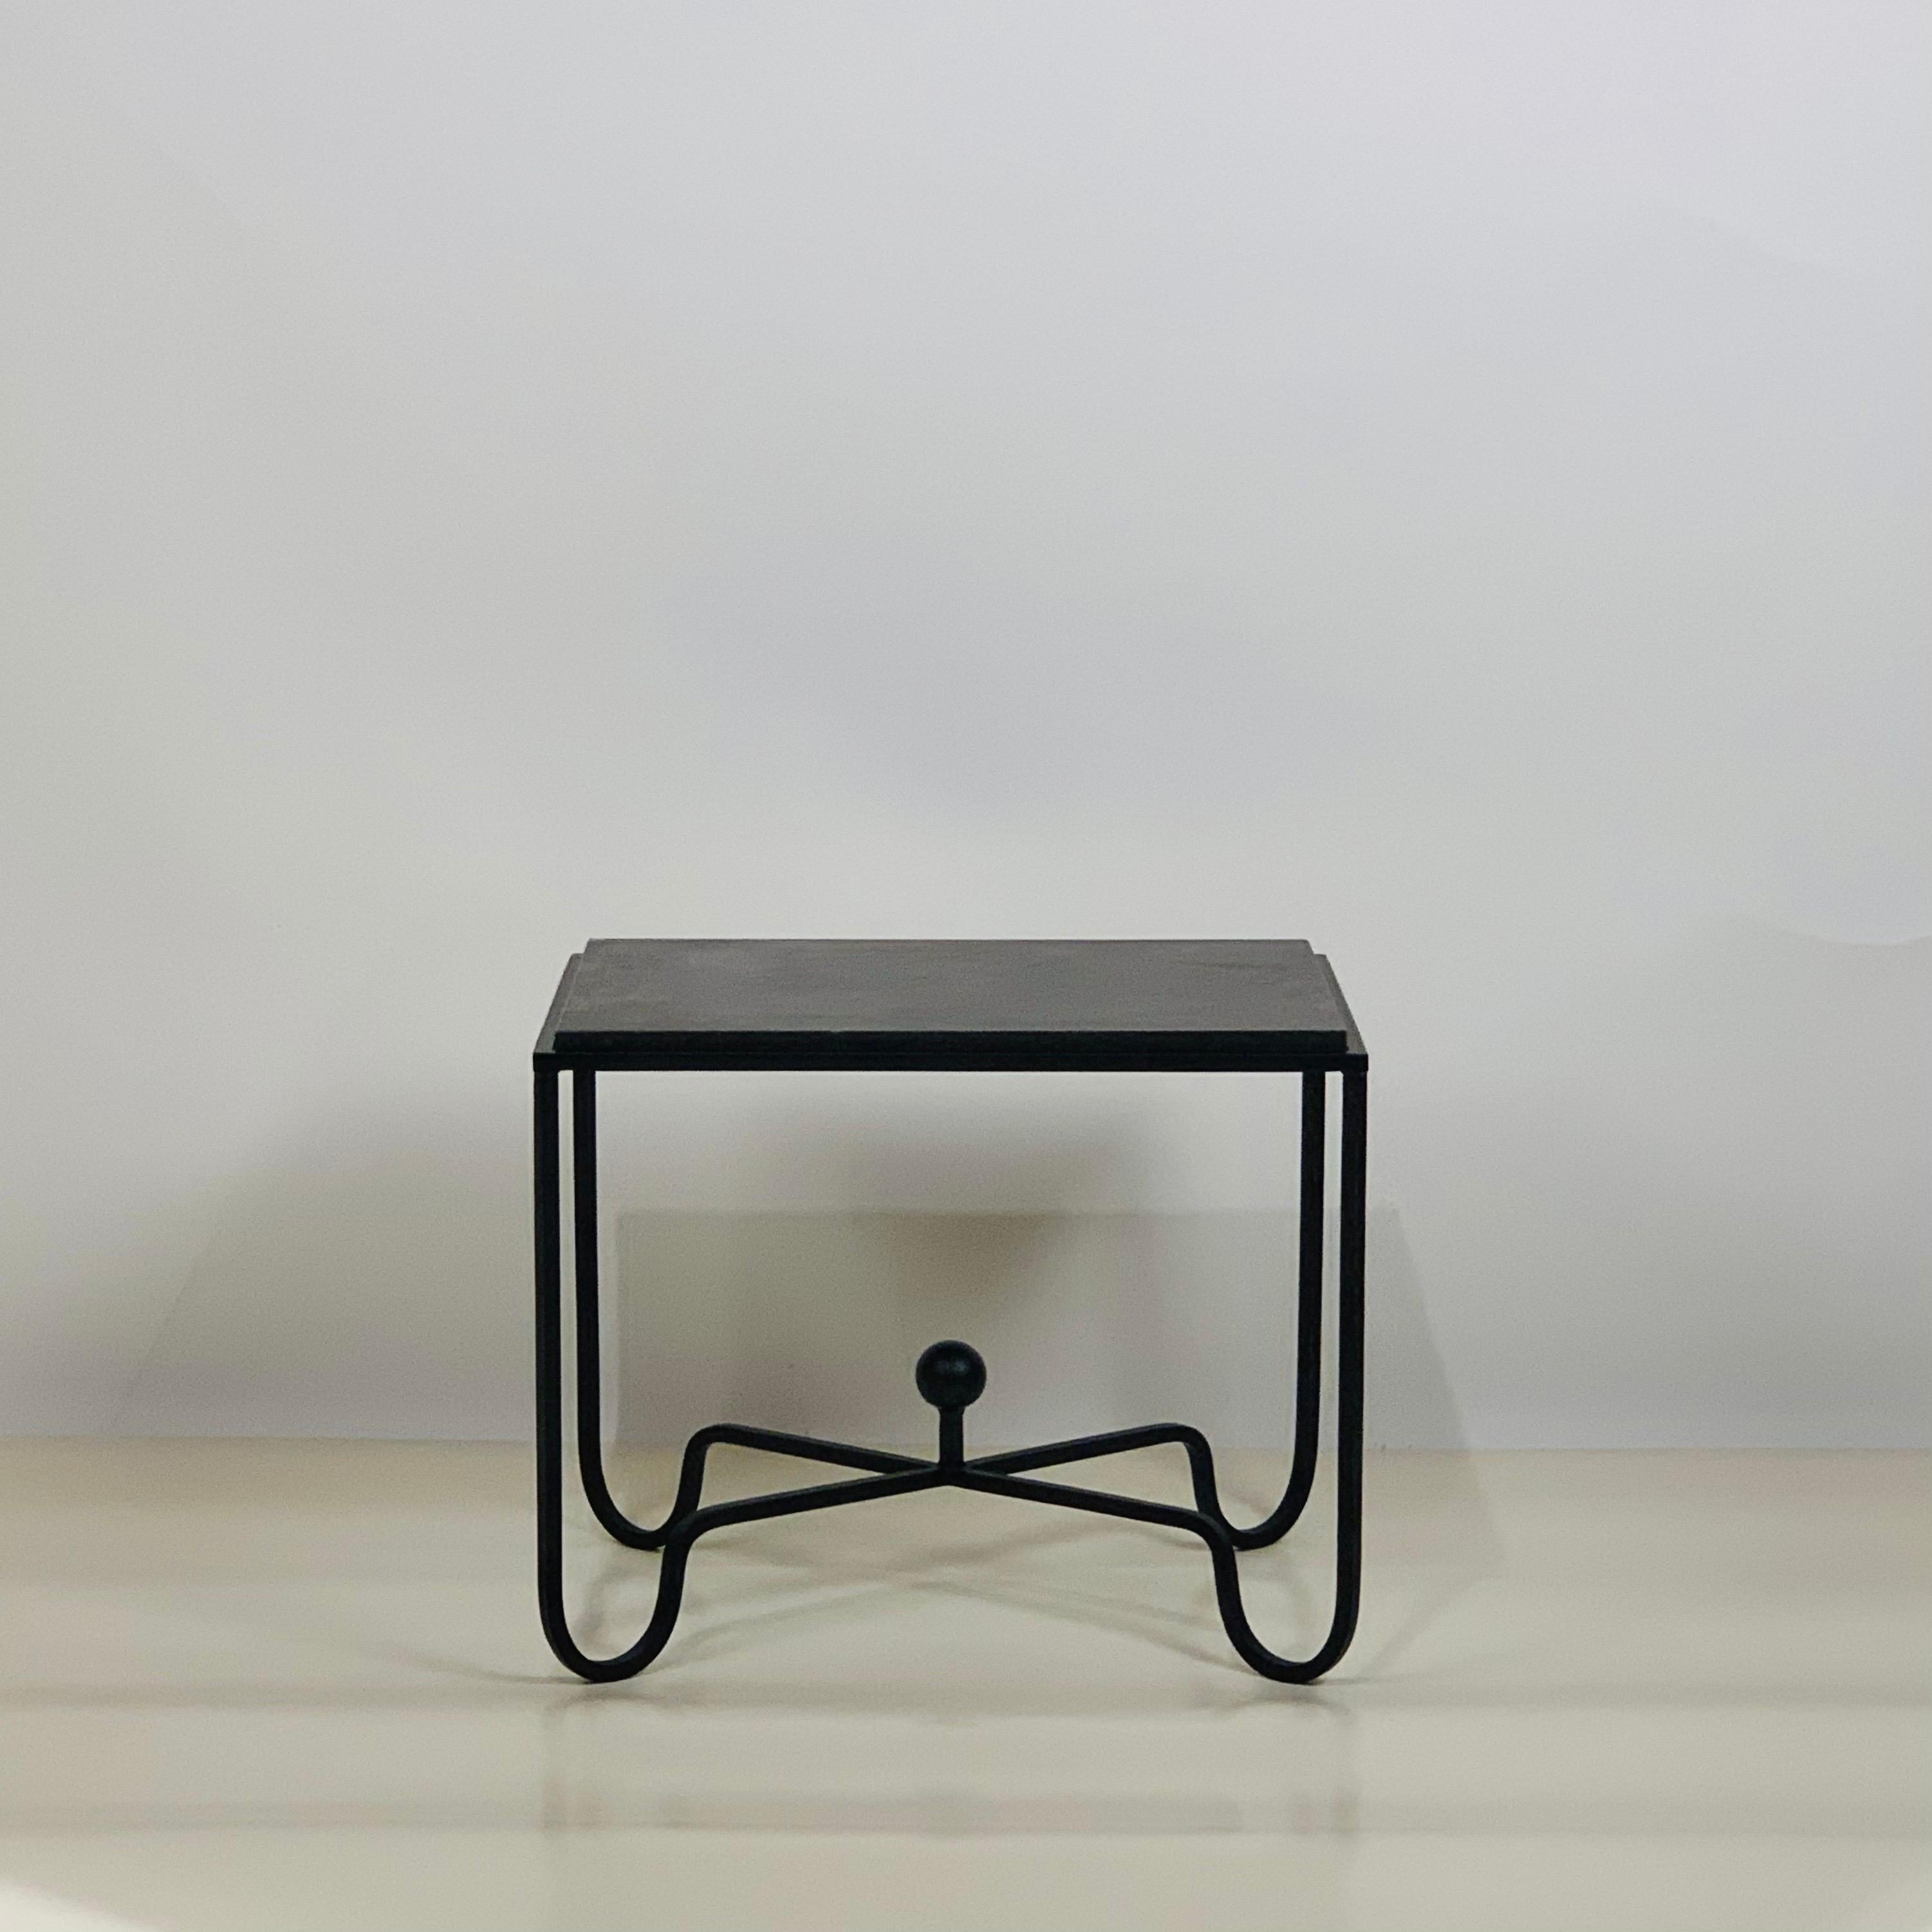 Pair of iron and black limestone 'Entretoise' side tables by Design Frères.